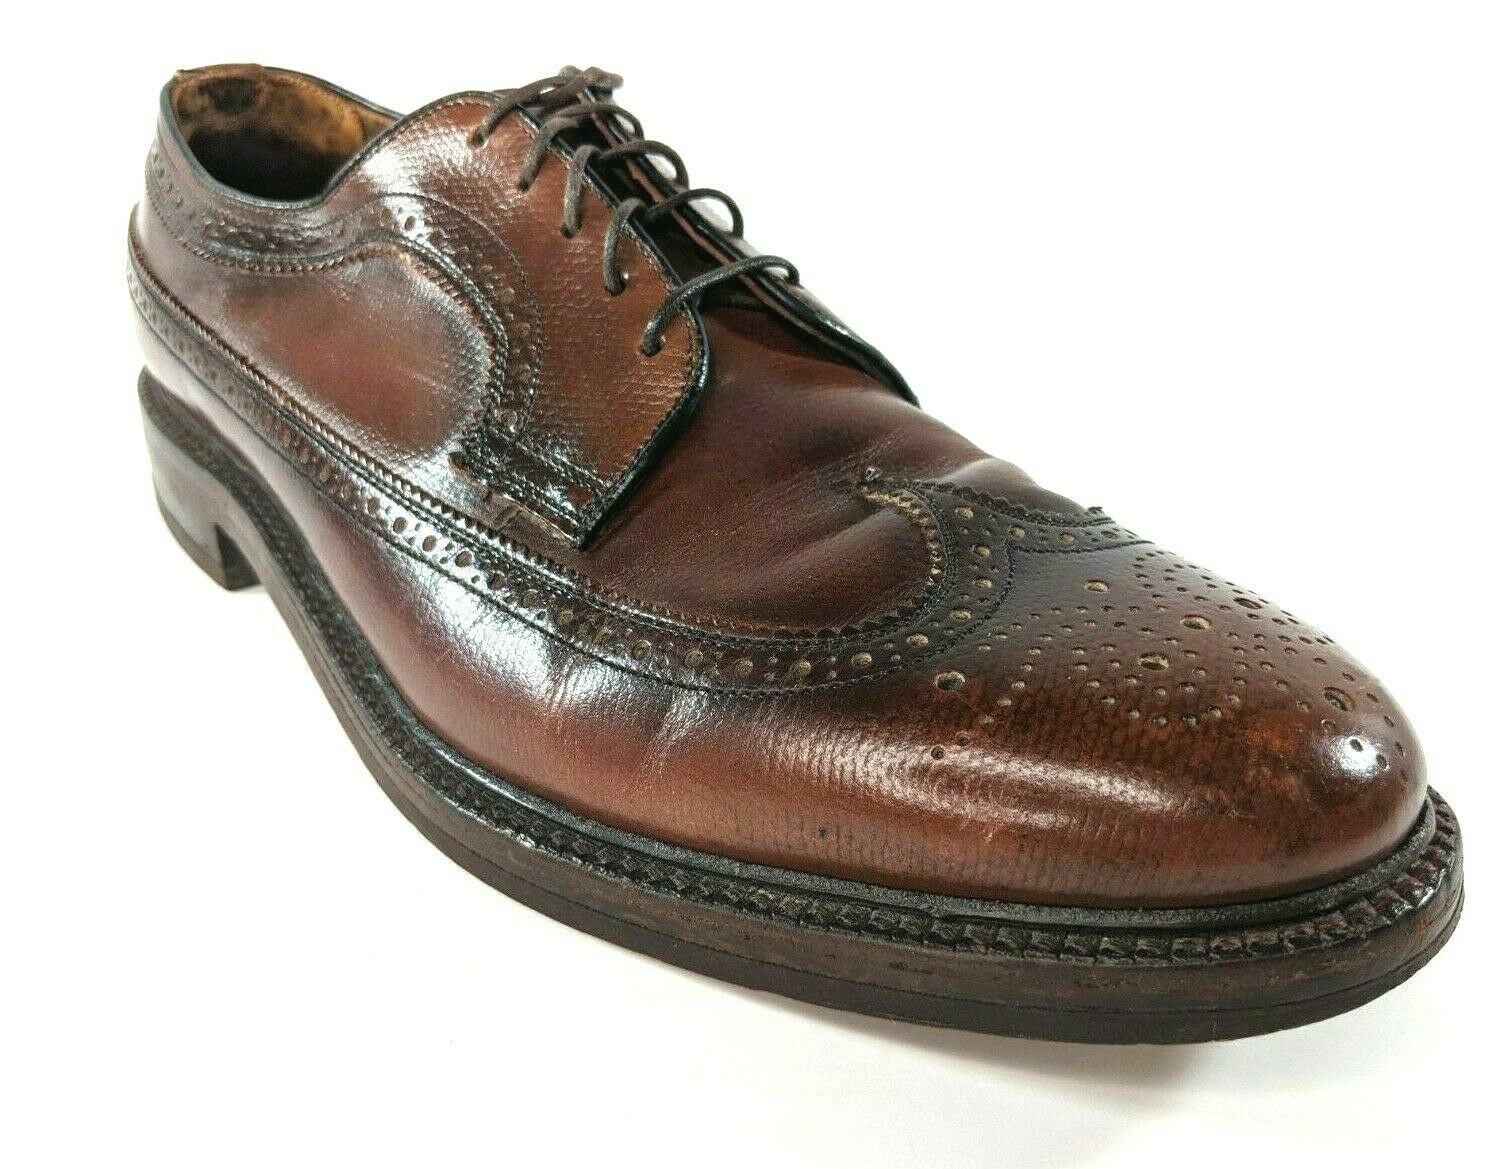 Primary image for Vintage Florsheim Brown Leather Dress Shoes Oxfords 10.5 B Wingtip Long Wings